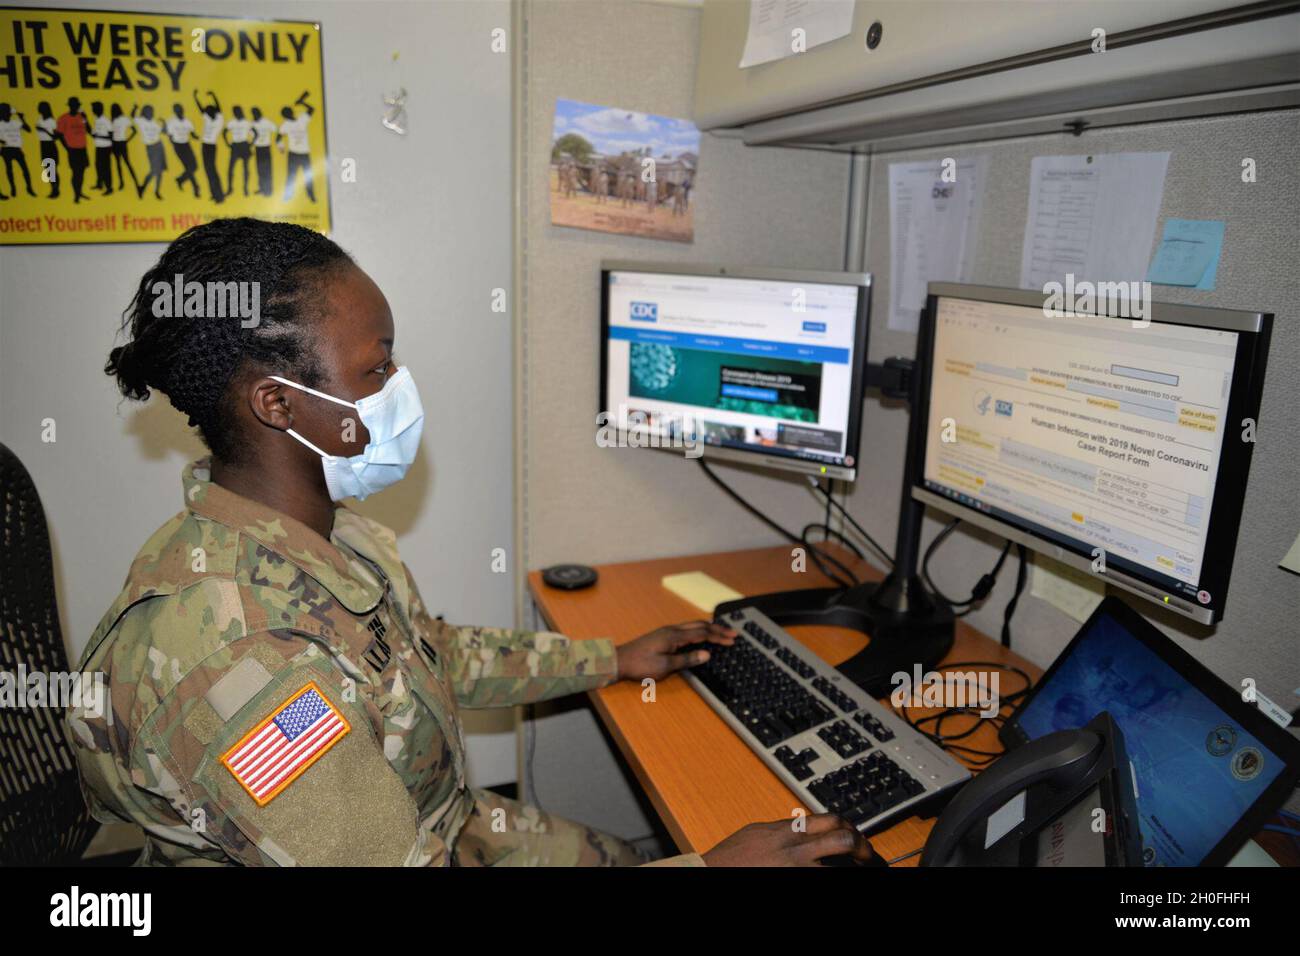 Capt. Victoria Aladeokin glances at a contact tracing form during her duties as an Army Public Health Nurse on Fort Leonard Wood, Missouri Feb. 25. Stock Photo